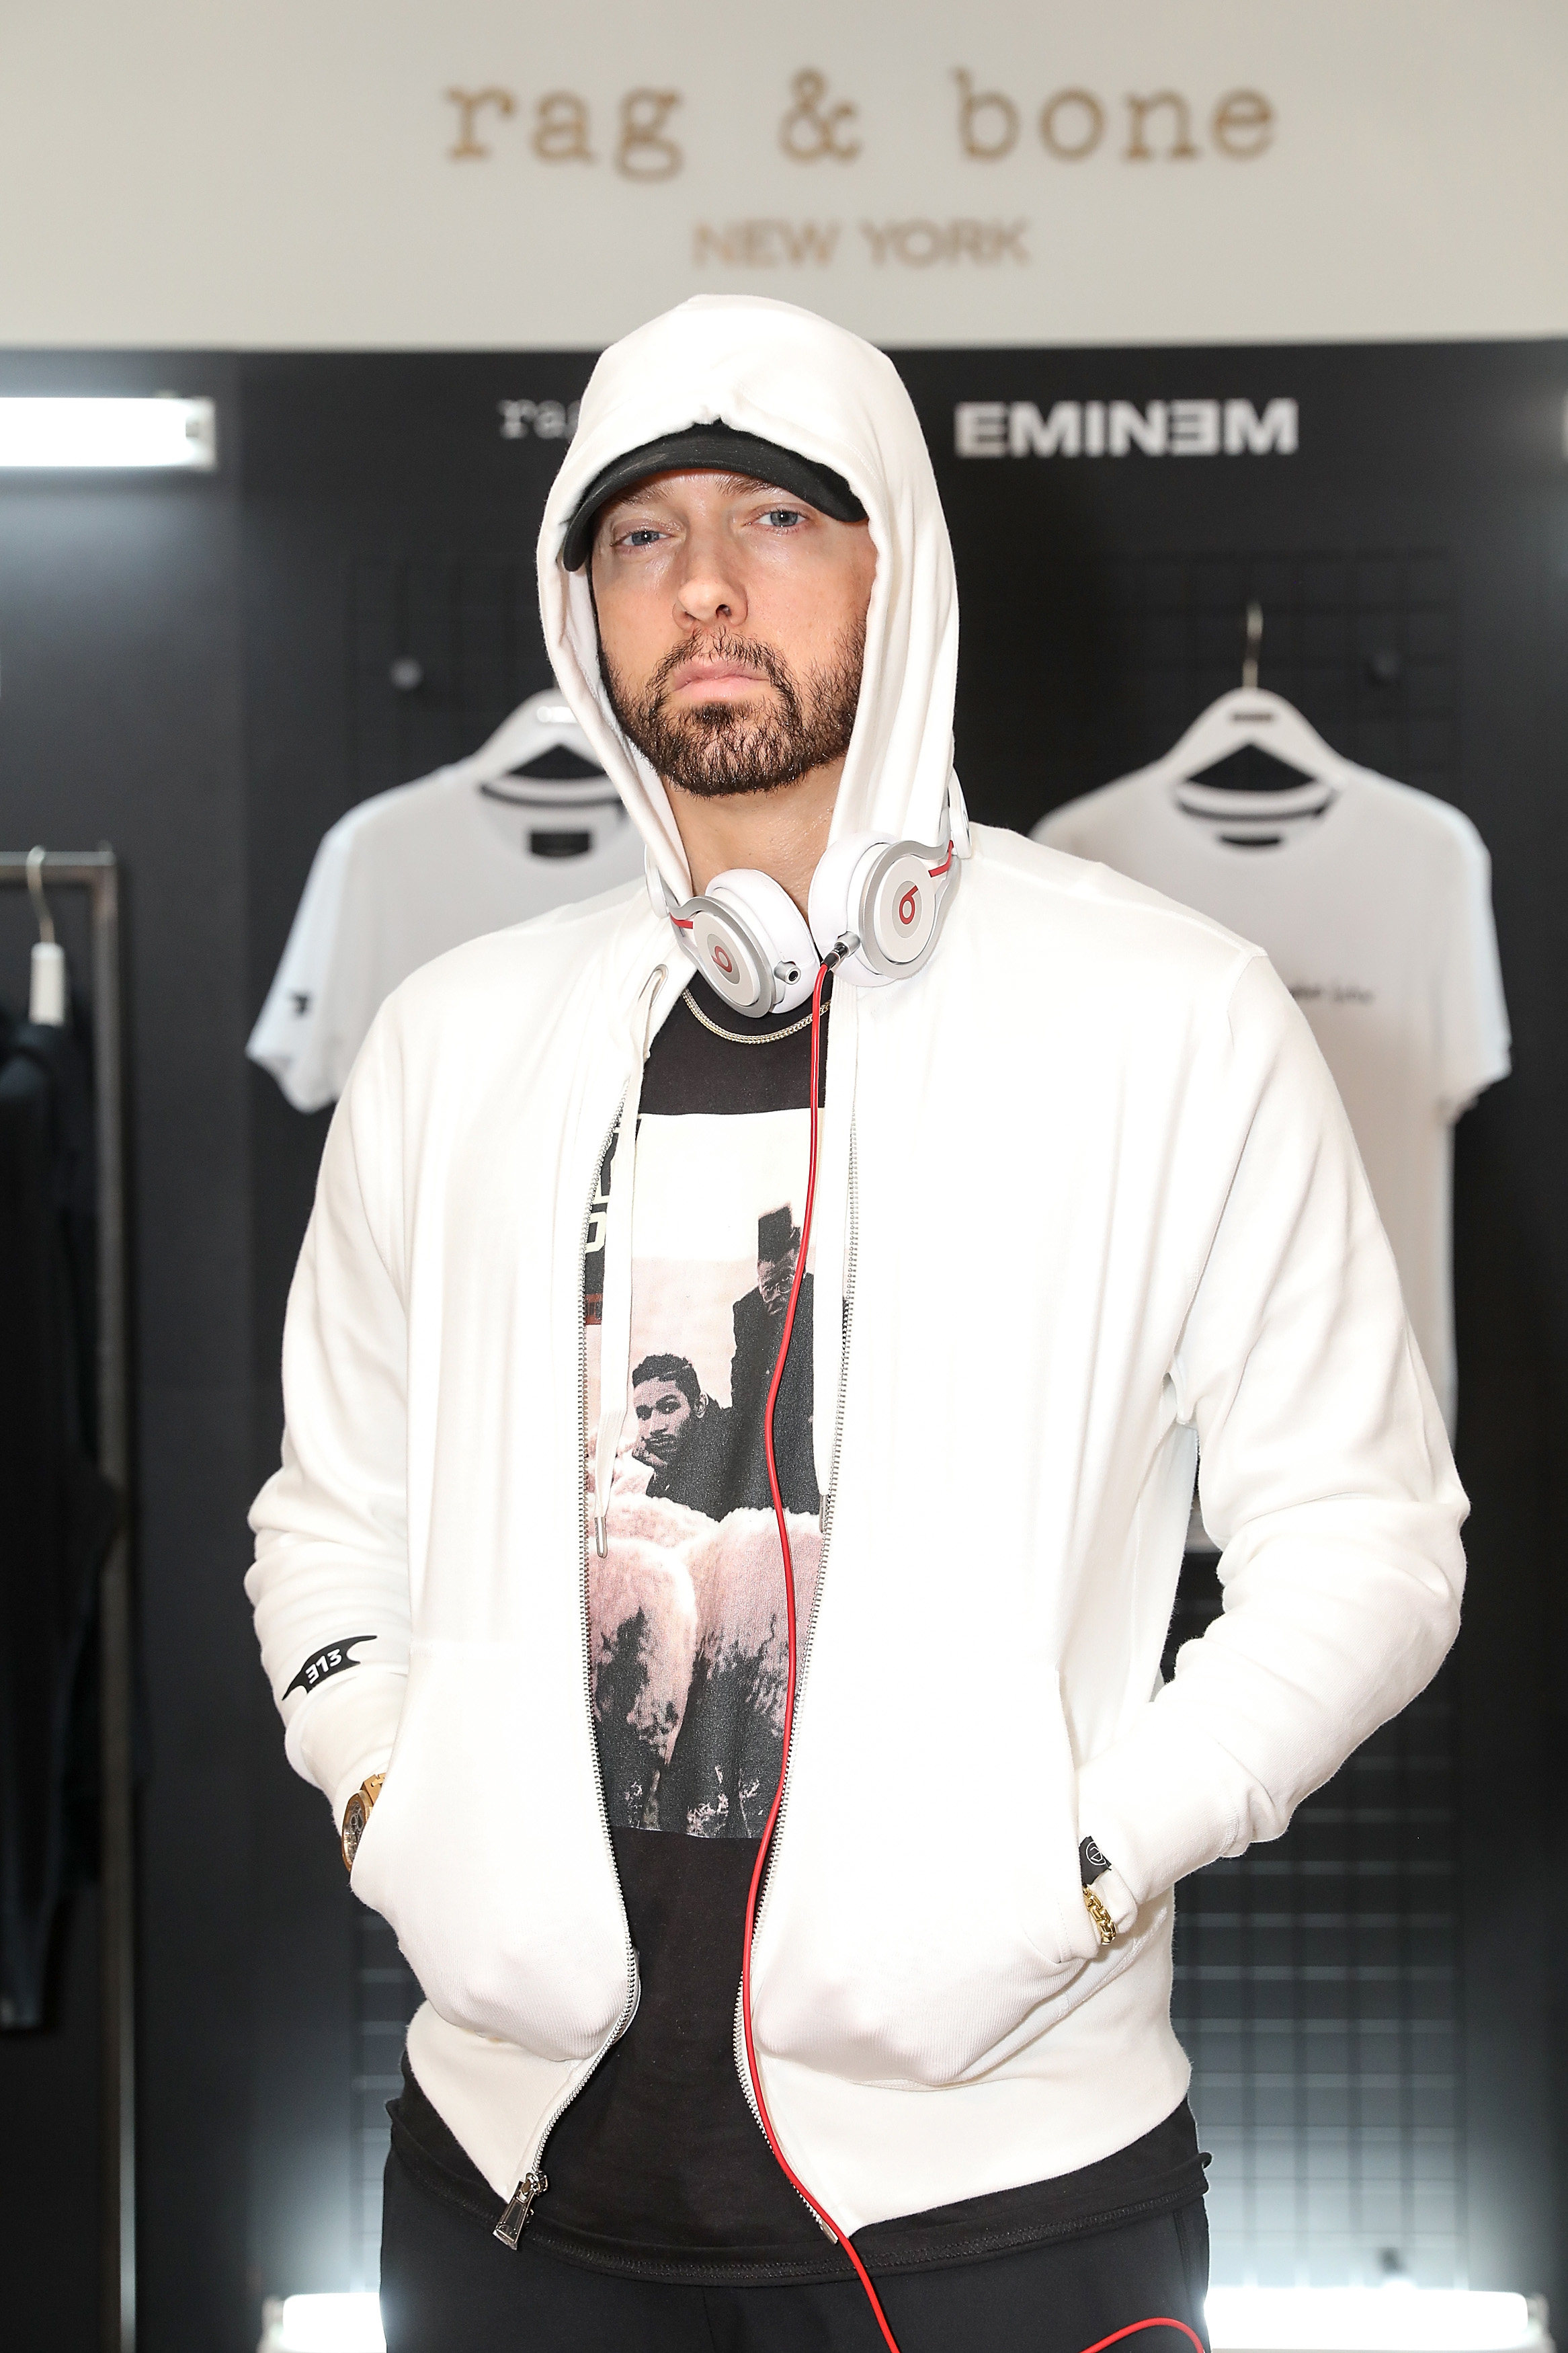 Eminem wearing a white hoodie and headphones in a store with his branded merchandise